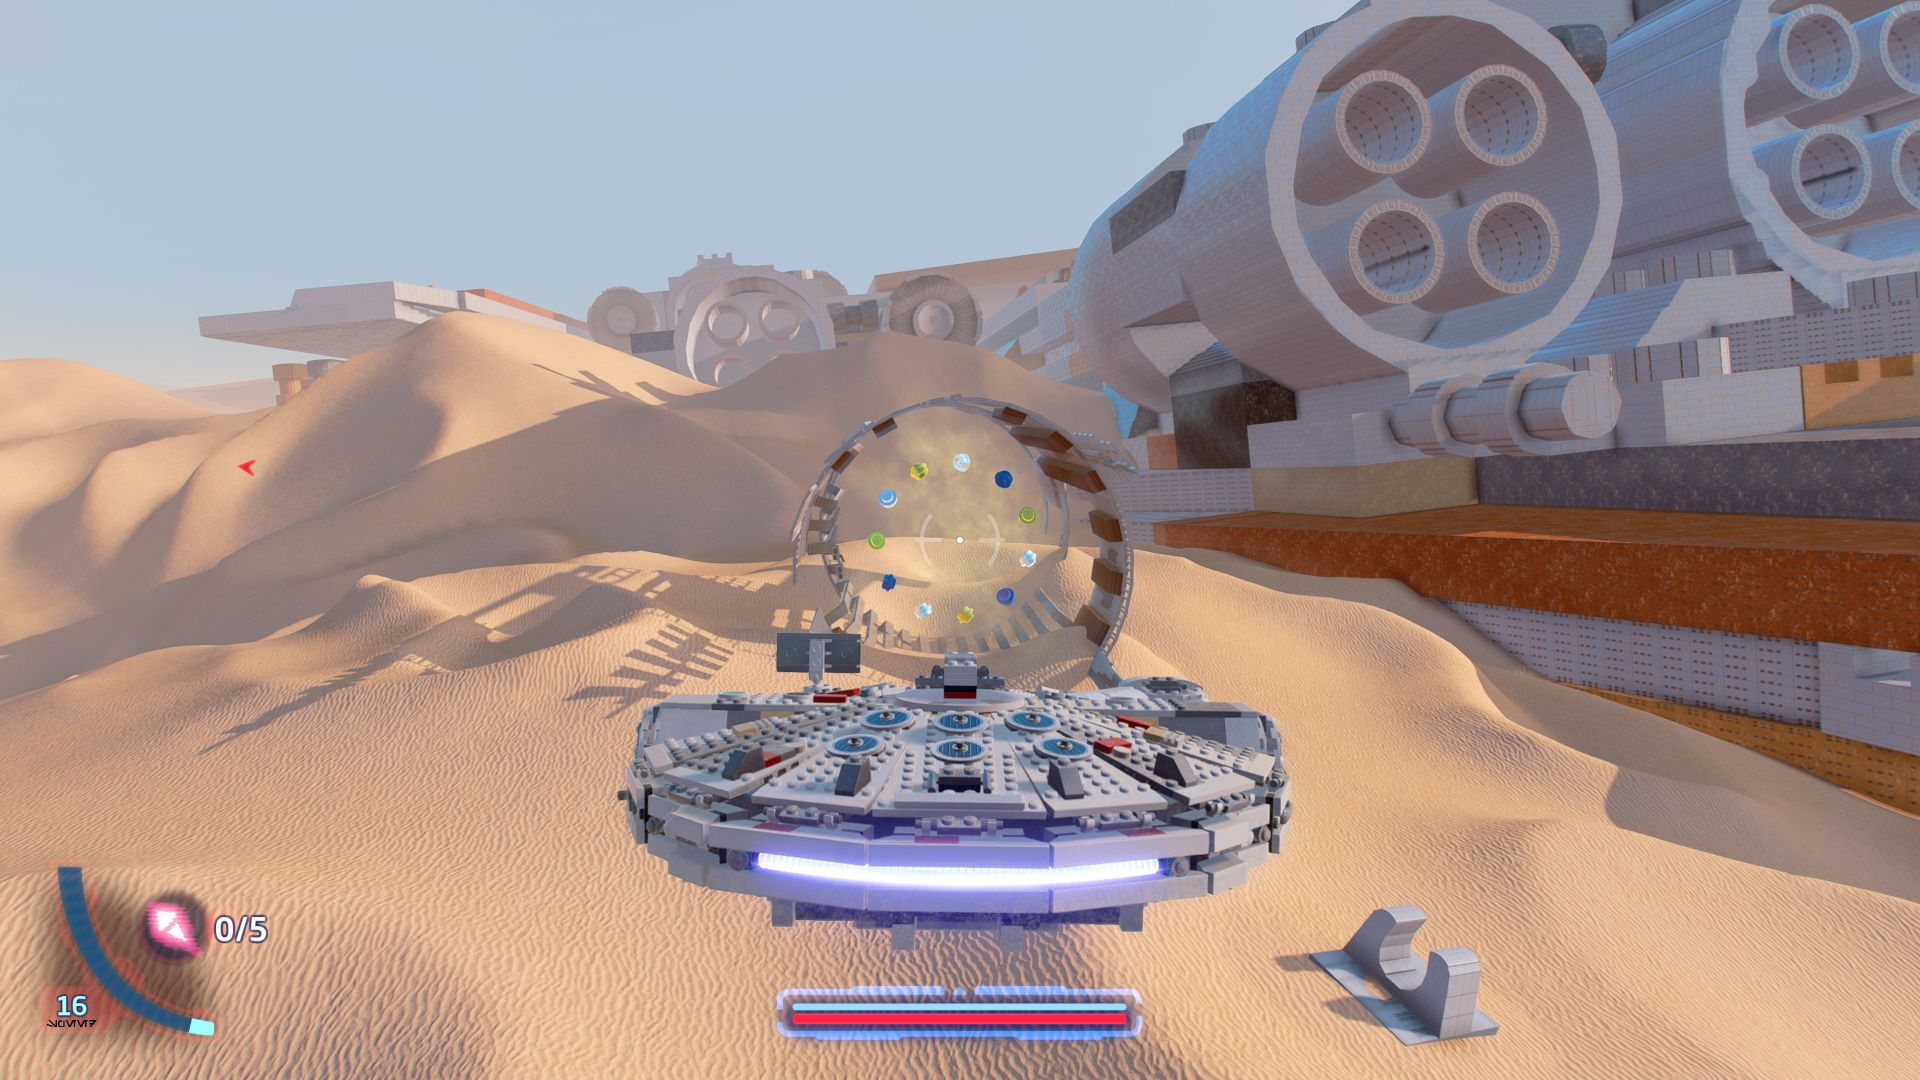  Flying the Millennium Falcon through junk cylinders